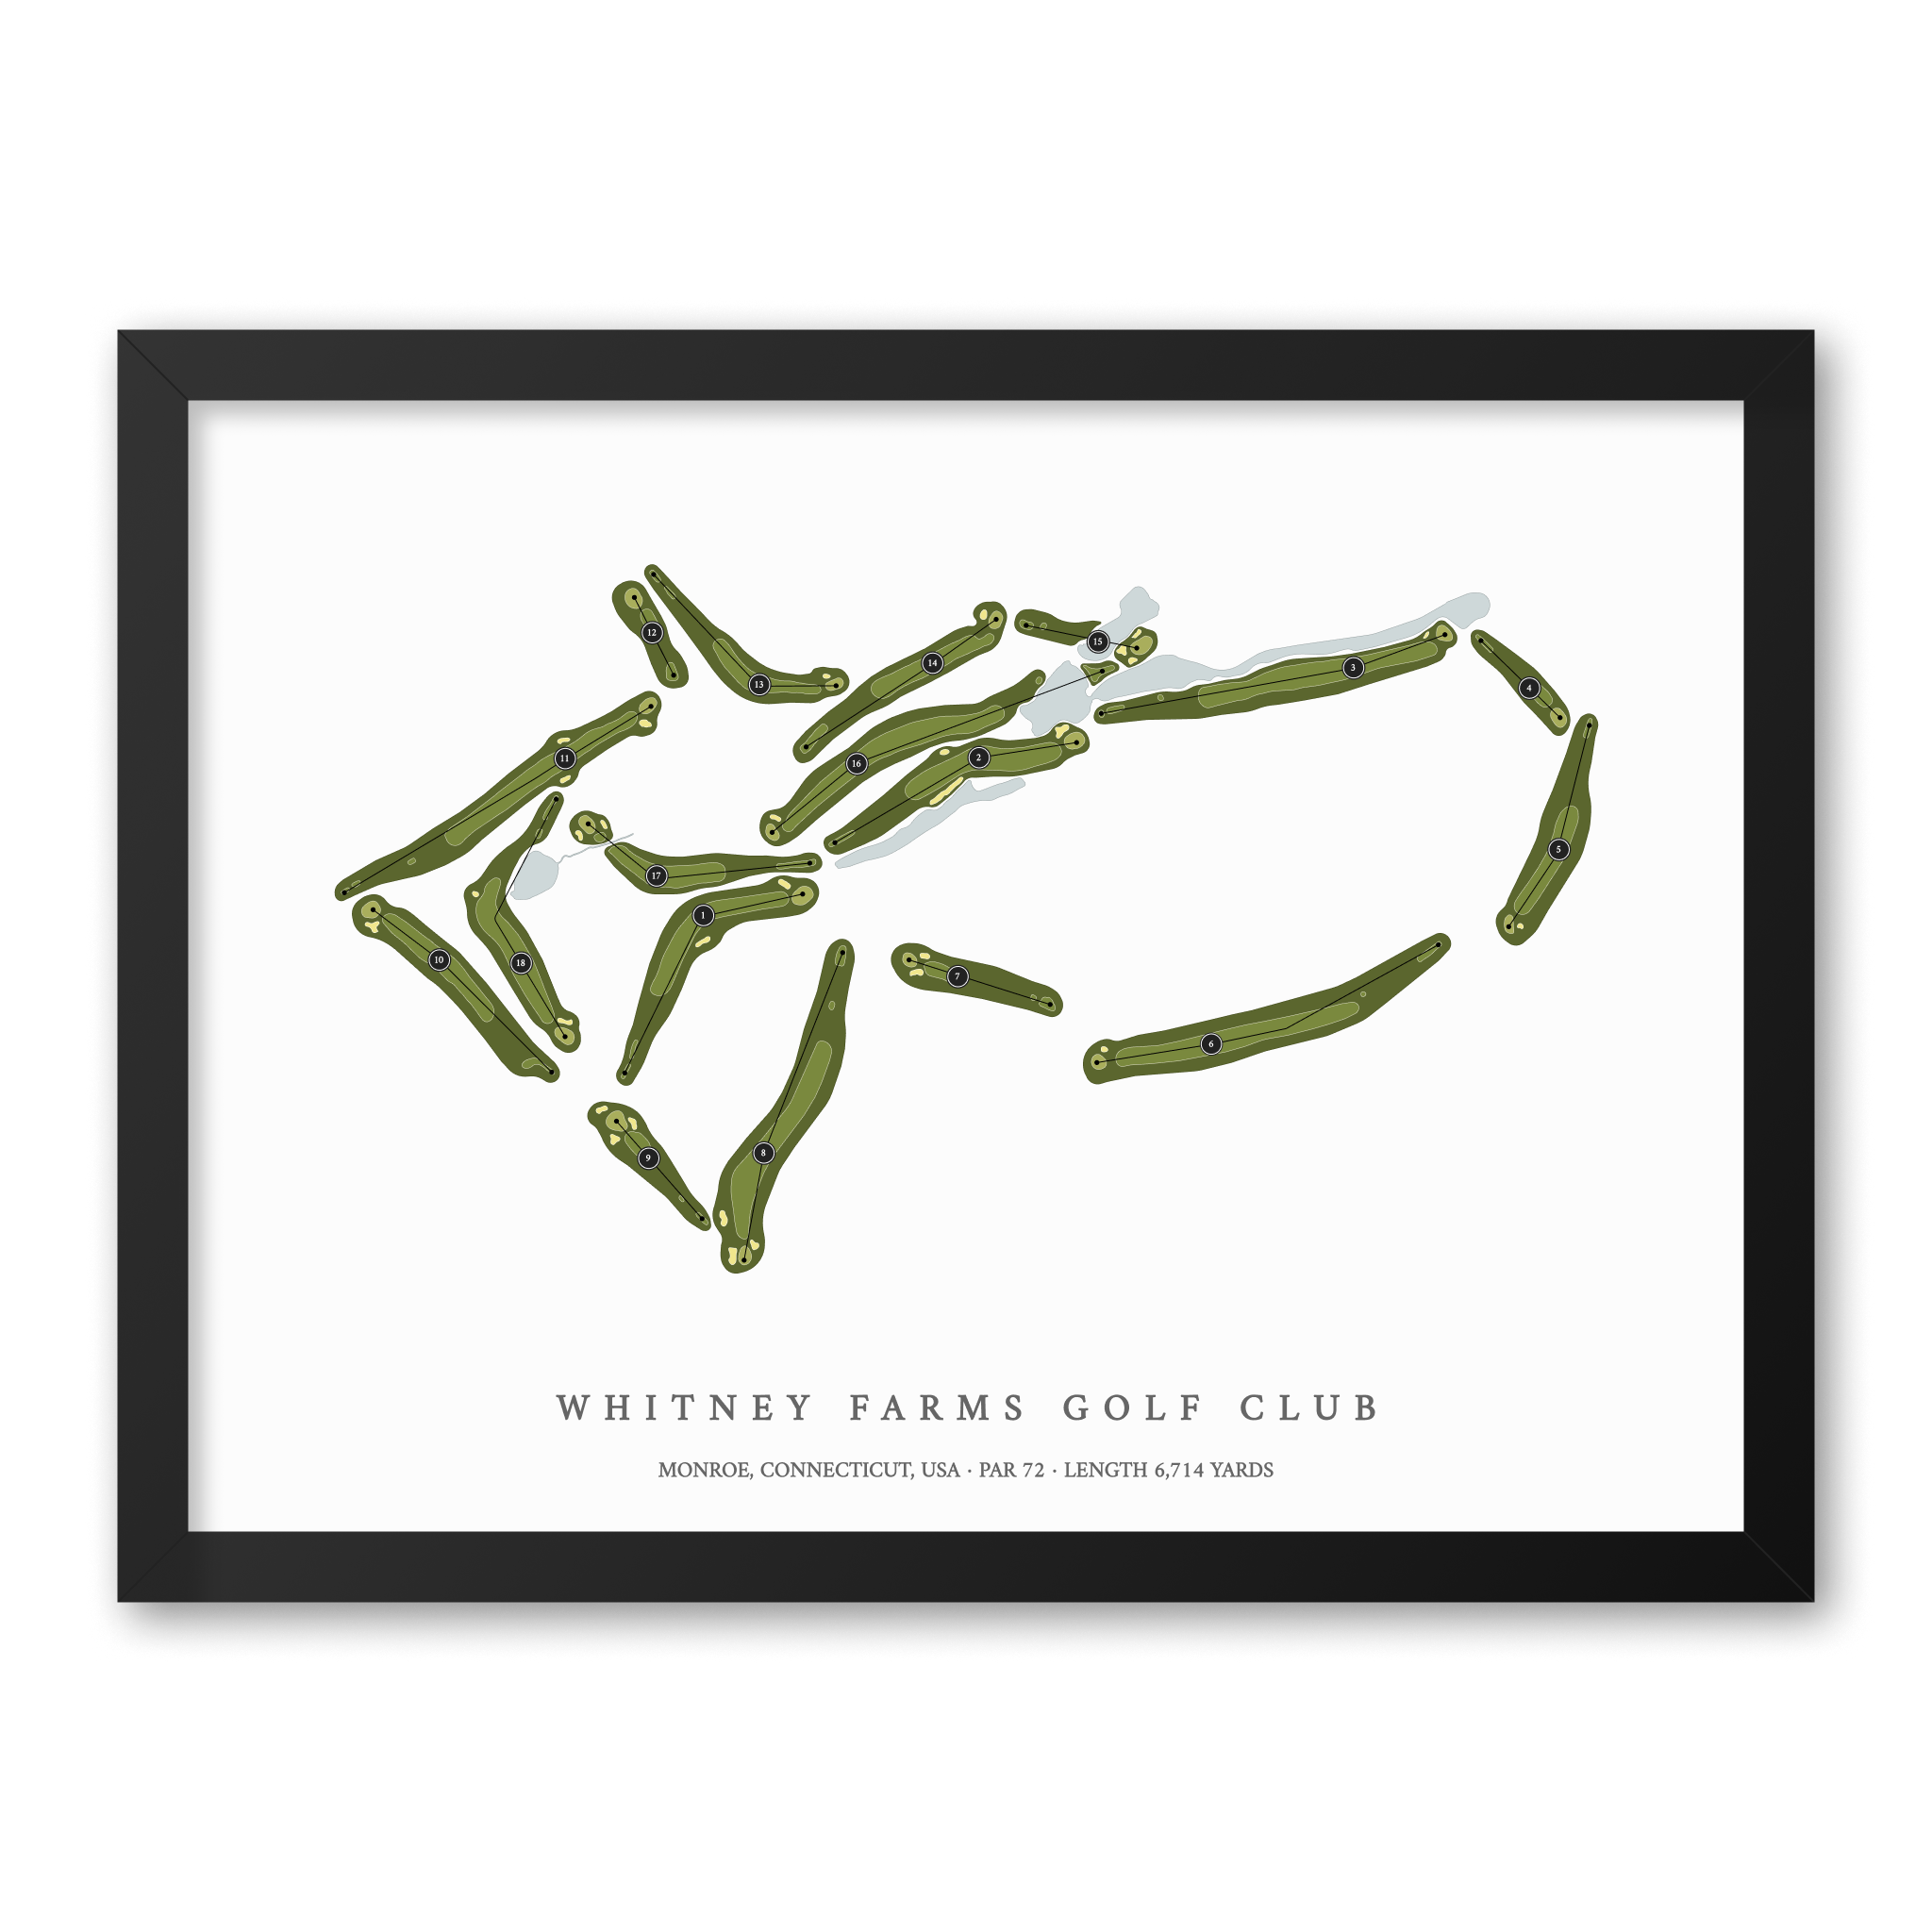 Whitney Farms Golf Club| Golf Course Print | Black Frame With Hole Numbers #hole numbers_yes